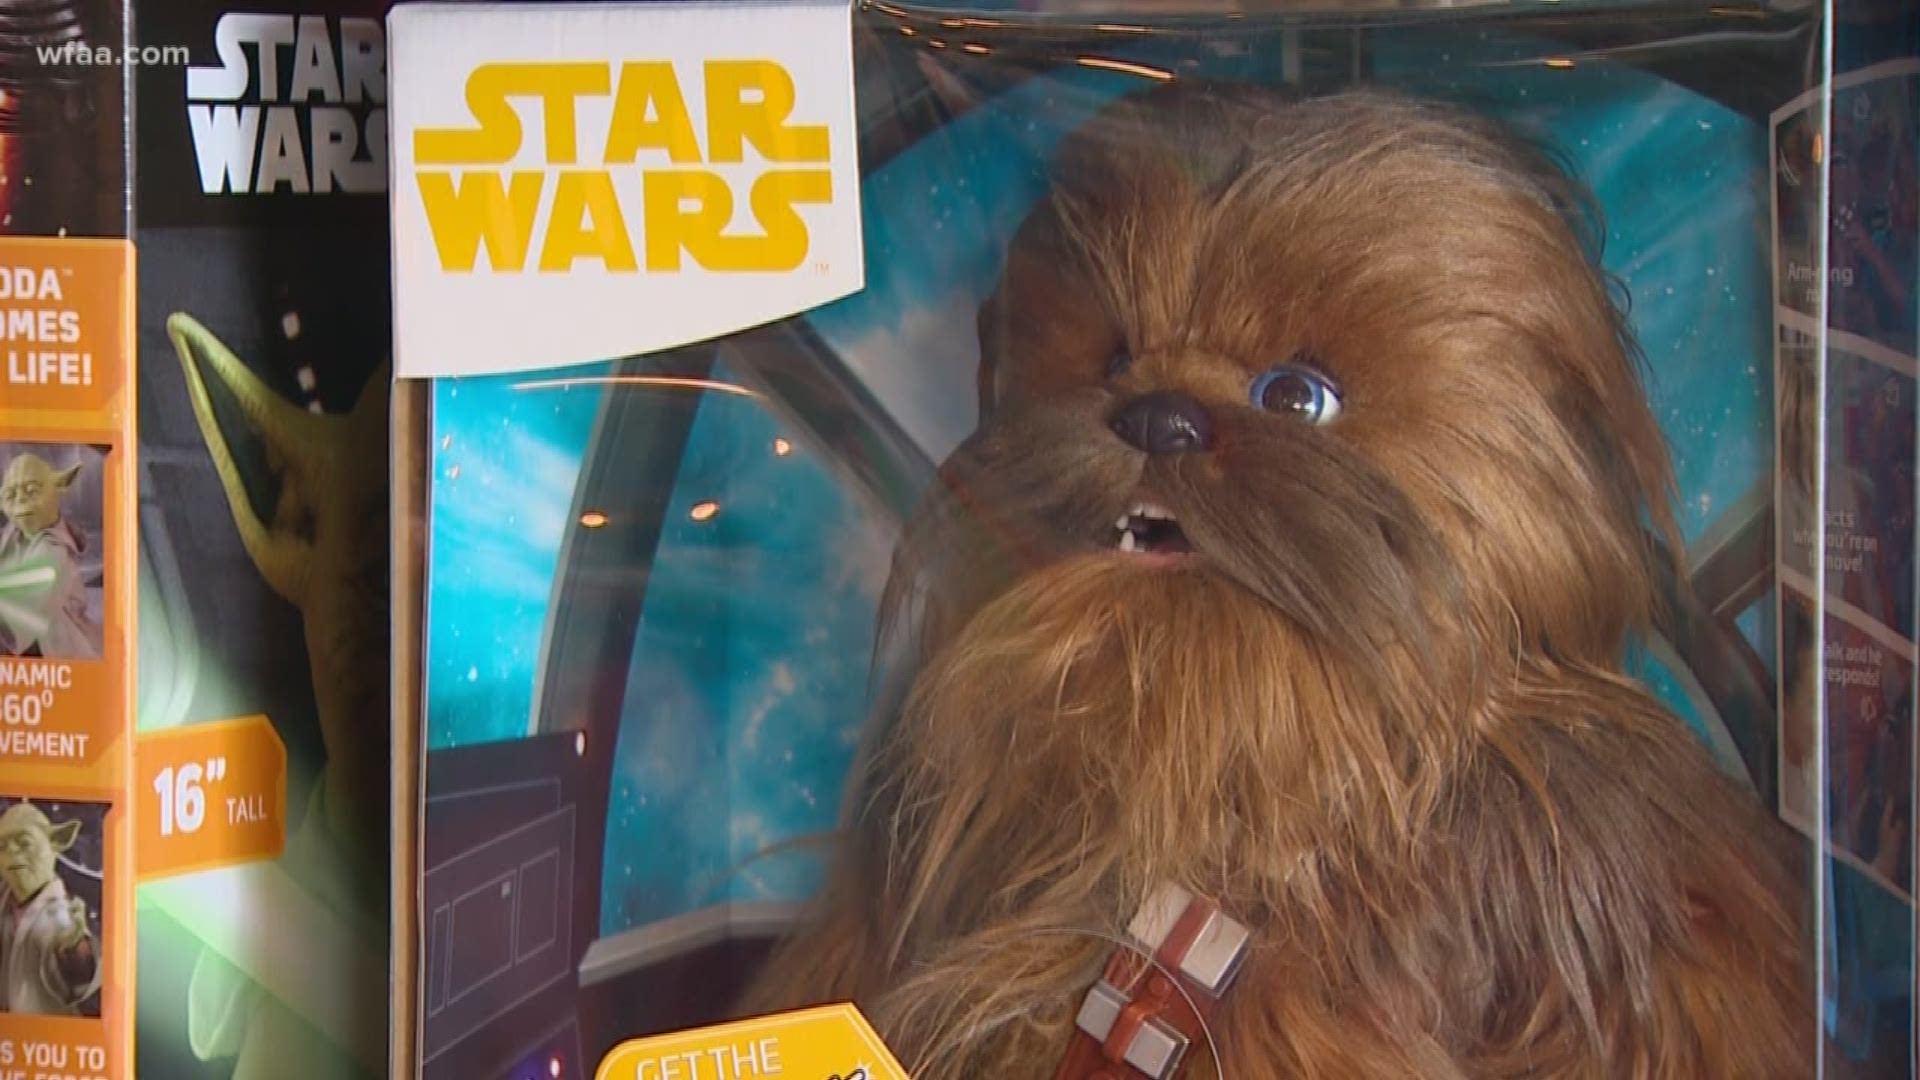 Holocron Toy Store donated $120,000 worth of brand-new Star Wars toys for sick and needy children in the community.